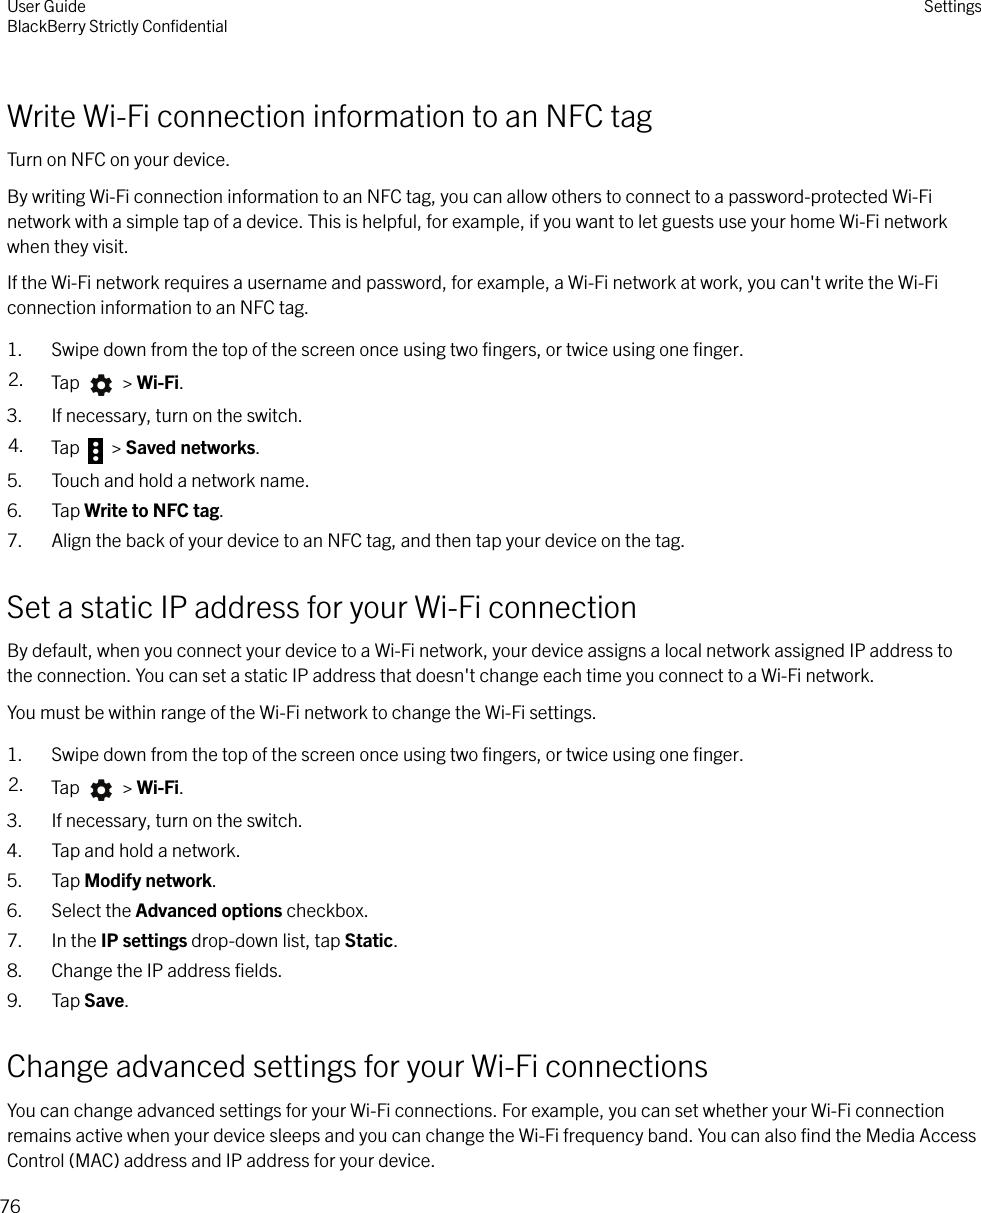 Write Wi-Fi connection information to an NFC tagTurn on NFC on your device.By writing Wi-Fi connection information to an NFC tag, you can allow others to connect to a password-protected Wi-Finetwork with a simple tap of a device. This is helpful, for example, if you want to let guests use your home Wi-Fi networkwhen they visit.If the Wi-Fi network requires a username and password, for example, a Wi-Fi network at work, you can&apos;t write the Wi-Ficonnection information to an NFC tag.1. Swipe down from the top of the screen once using two ﬁngers, or twice using one ﬁnger.2. Tap   &gt; Wi-Fi.3. If necessary, turn on the switch.4. Tap   &gt; Saved networks.5. Touch and hold a network name.6. Tap Write to NFC tag.7. Align the back of your device to an NFC tag, and then tap your device on the tag.Set a static IP address for your Wi-Fi connectionBy default, when you connect your device to a Wi-Fi network, your device assigns a local network assigned IP address tothe connection. You can set a static IP address that doesn&apos;t change each time you connect to a Wi-Fi network.You must be within range of the Wi-Fi network to change the Wi-Fi settings.1. Swipe down from the top of the screen once using two ﬁngers, or twice using one ﬁnger.2. Tap   &gt; Wi-Fi.3. If necessary, turn on the switch.4. Tap and hold a network.5. Tap Modify network.6. Select the Advanced options checkbox.7. In the IP settings drop-down list, tap Static.8. Change the IP address ﬁelds.9. Tap Save.Change advanced settings for your Wi-Fi connectionsYou can change advanced settings for your Wi-Fi connections. For example, you can set whether your Wi-Fi connectionremains active when your device sleeps and you can change the Wi-Fi frequency band. You can also ﬁnd the Media AccessControl (MAC) address and IP address for your device.User GuideBlackBerry Strictly ConﬁdentialSettings76